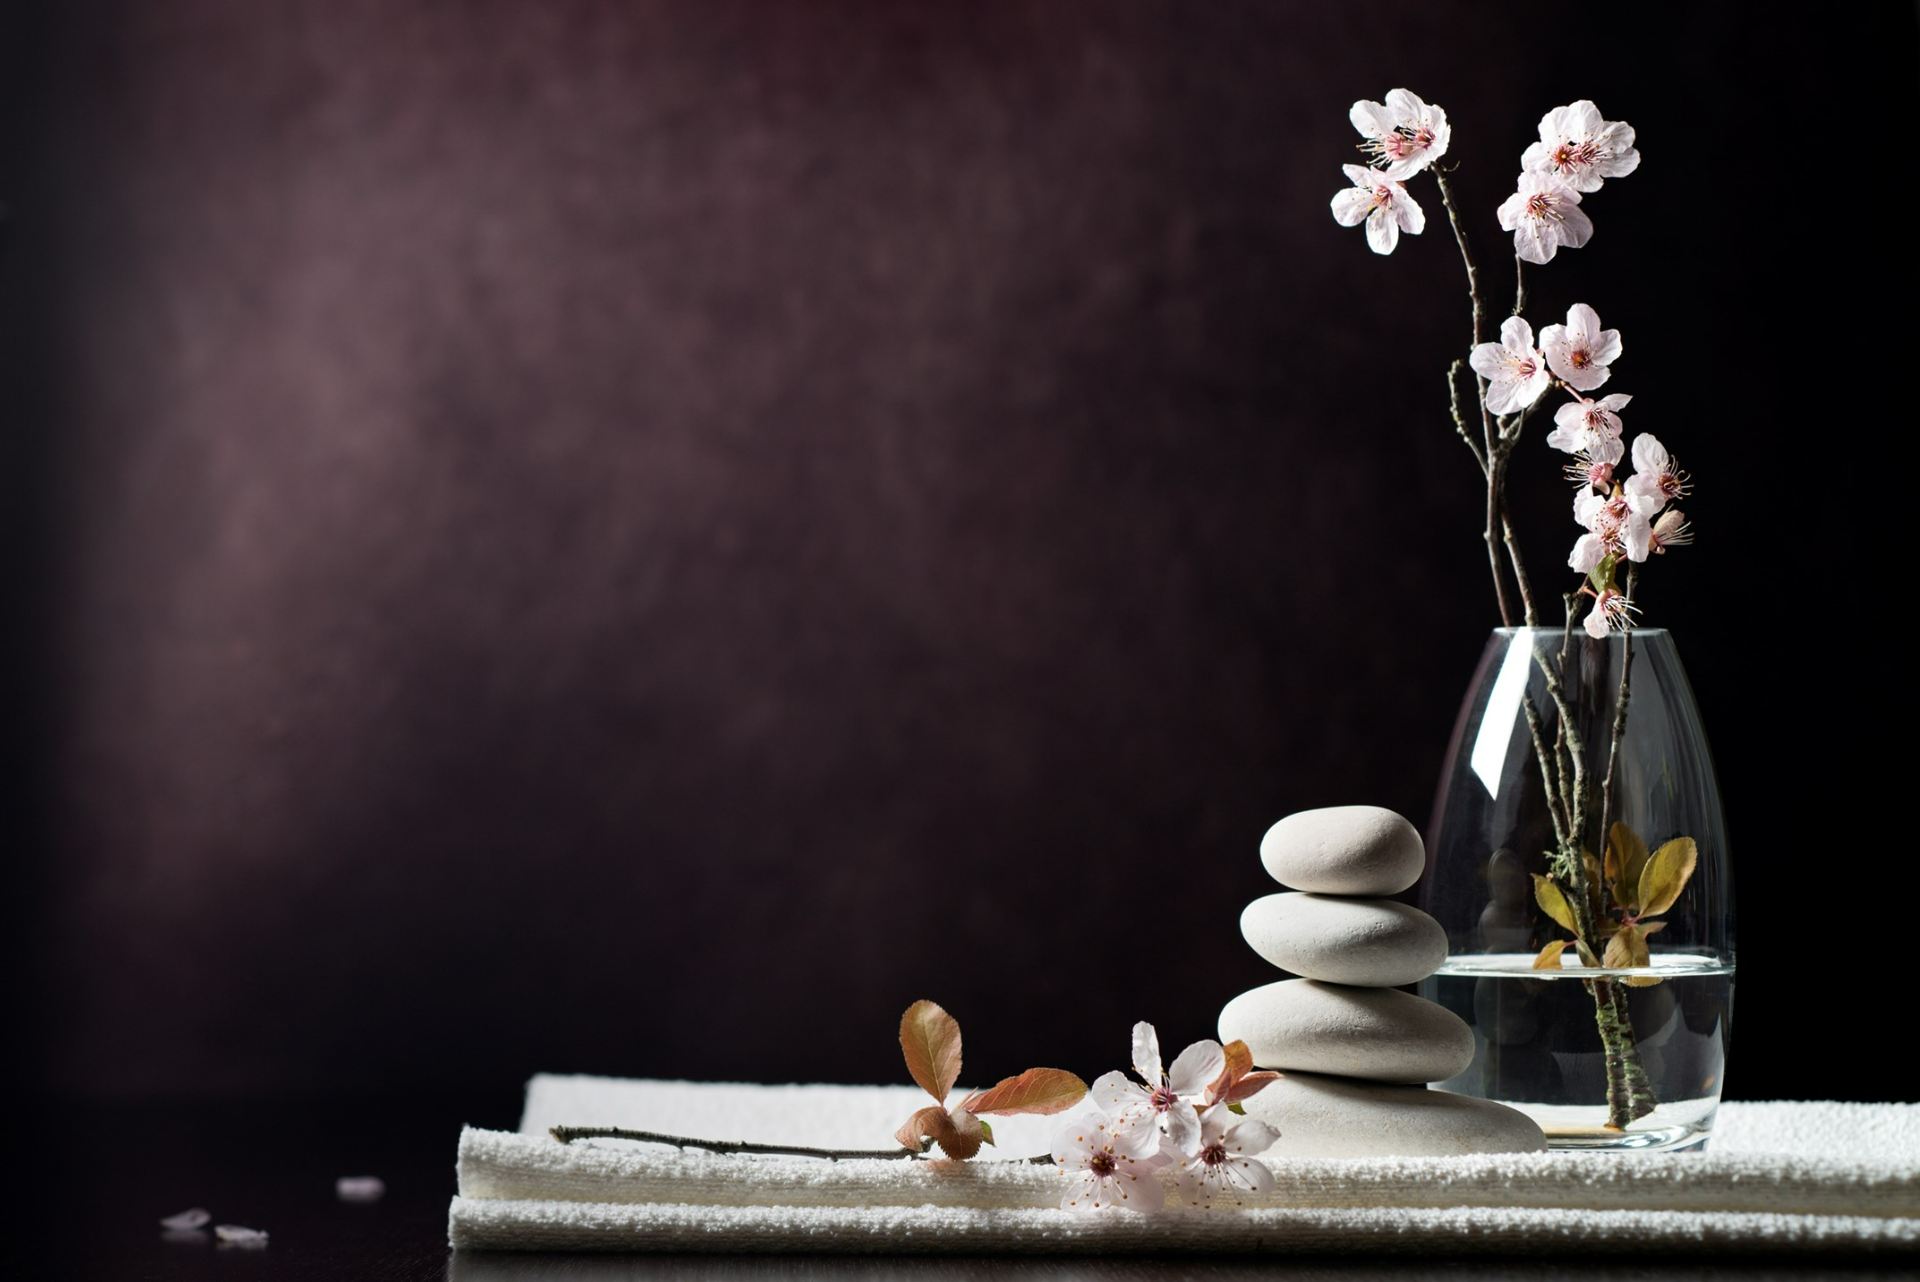 Peaceful setting of stones and cherry blossoms